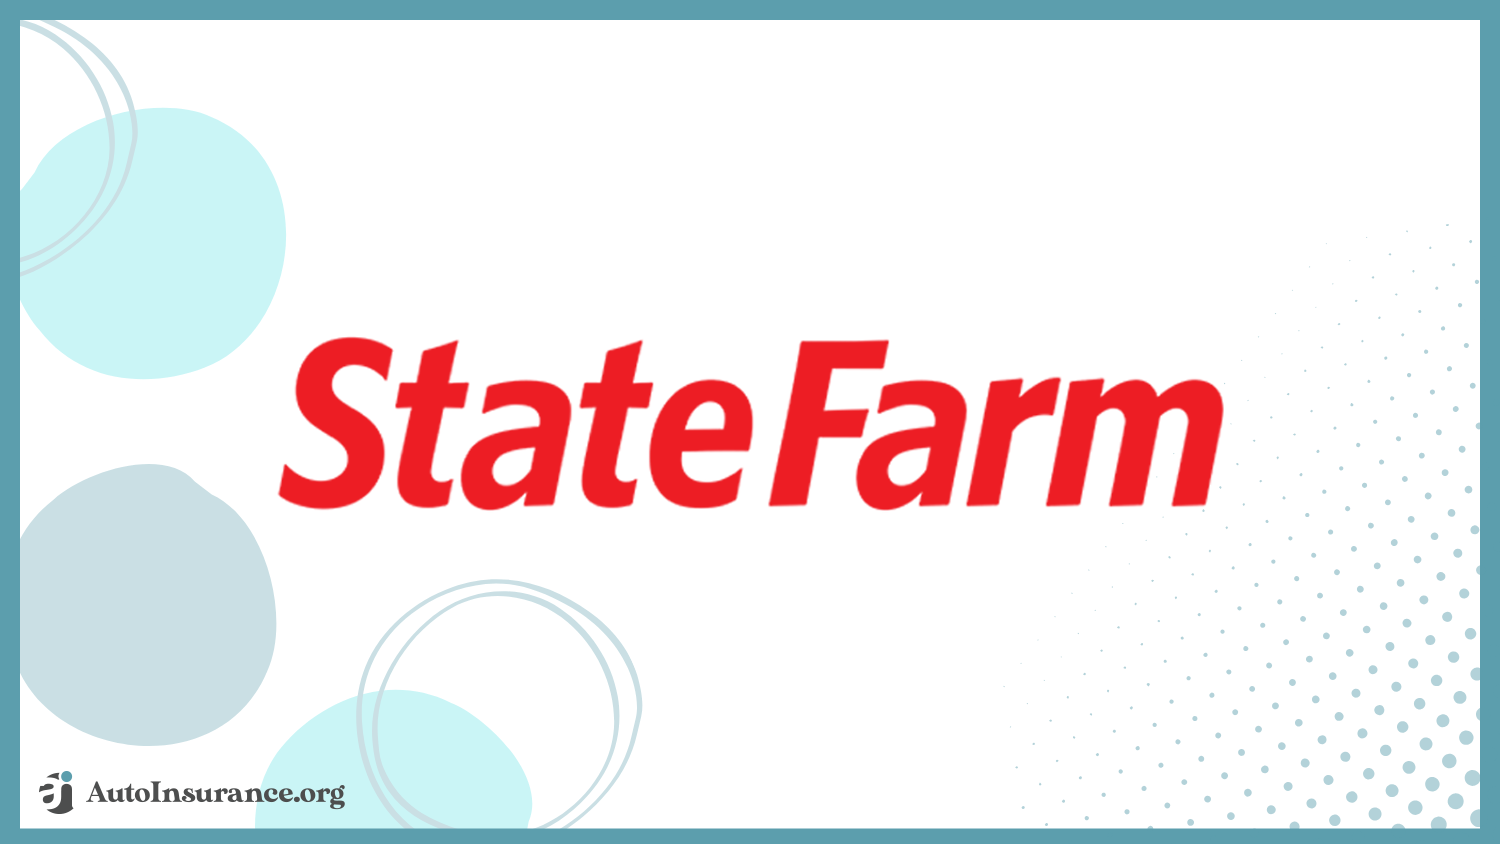 State Farm: cheap auto insurance for families with multiple drivers